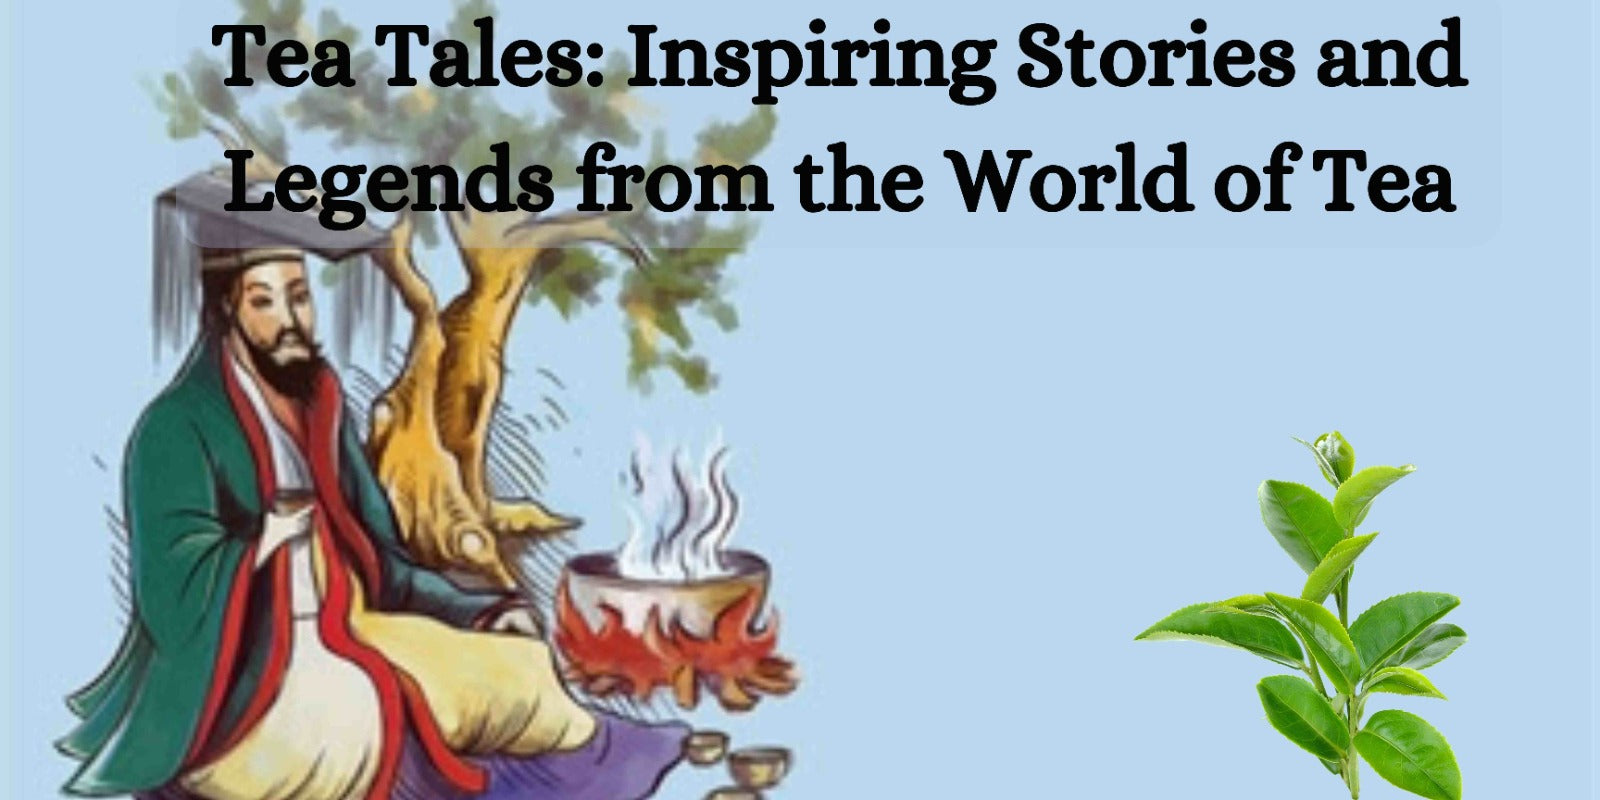 Tea Tales: Inspiring Stories and Legends from the World of Tea